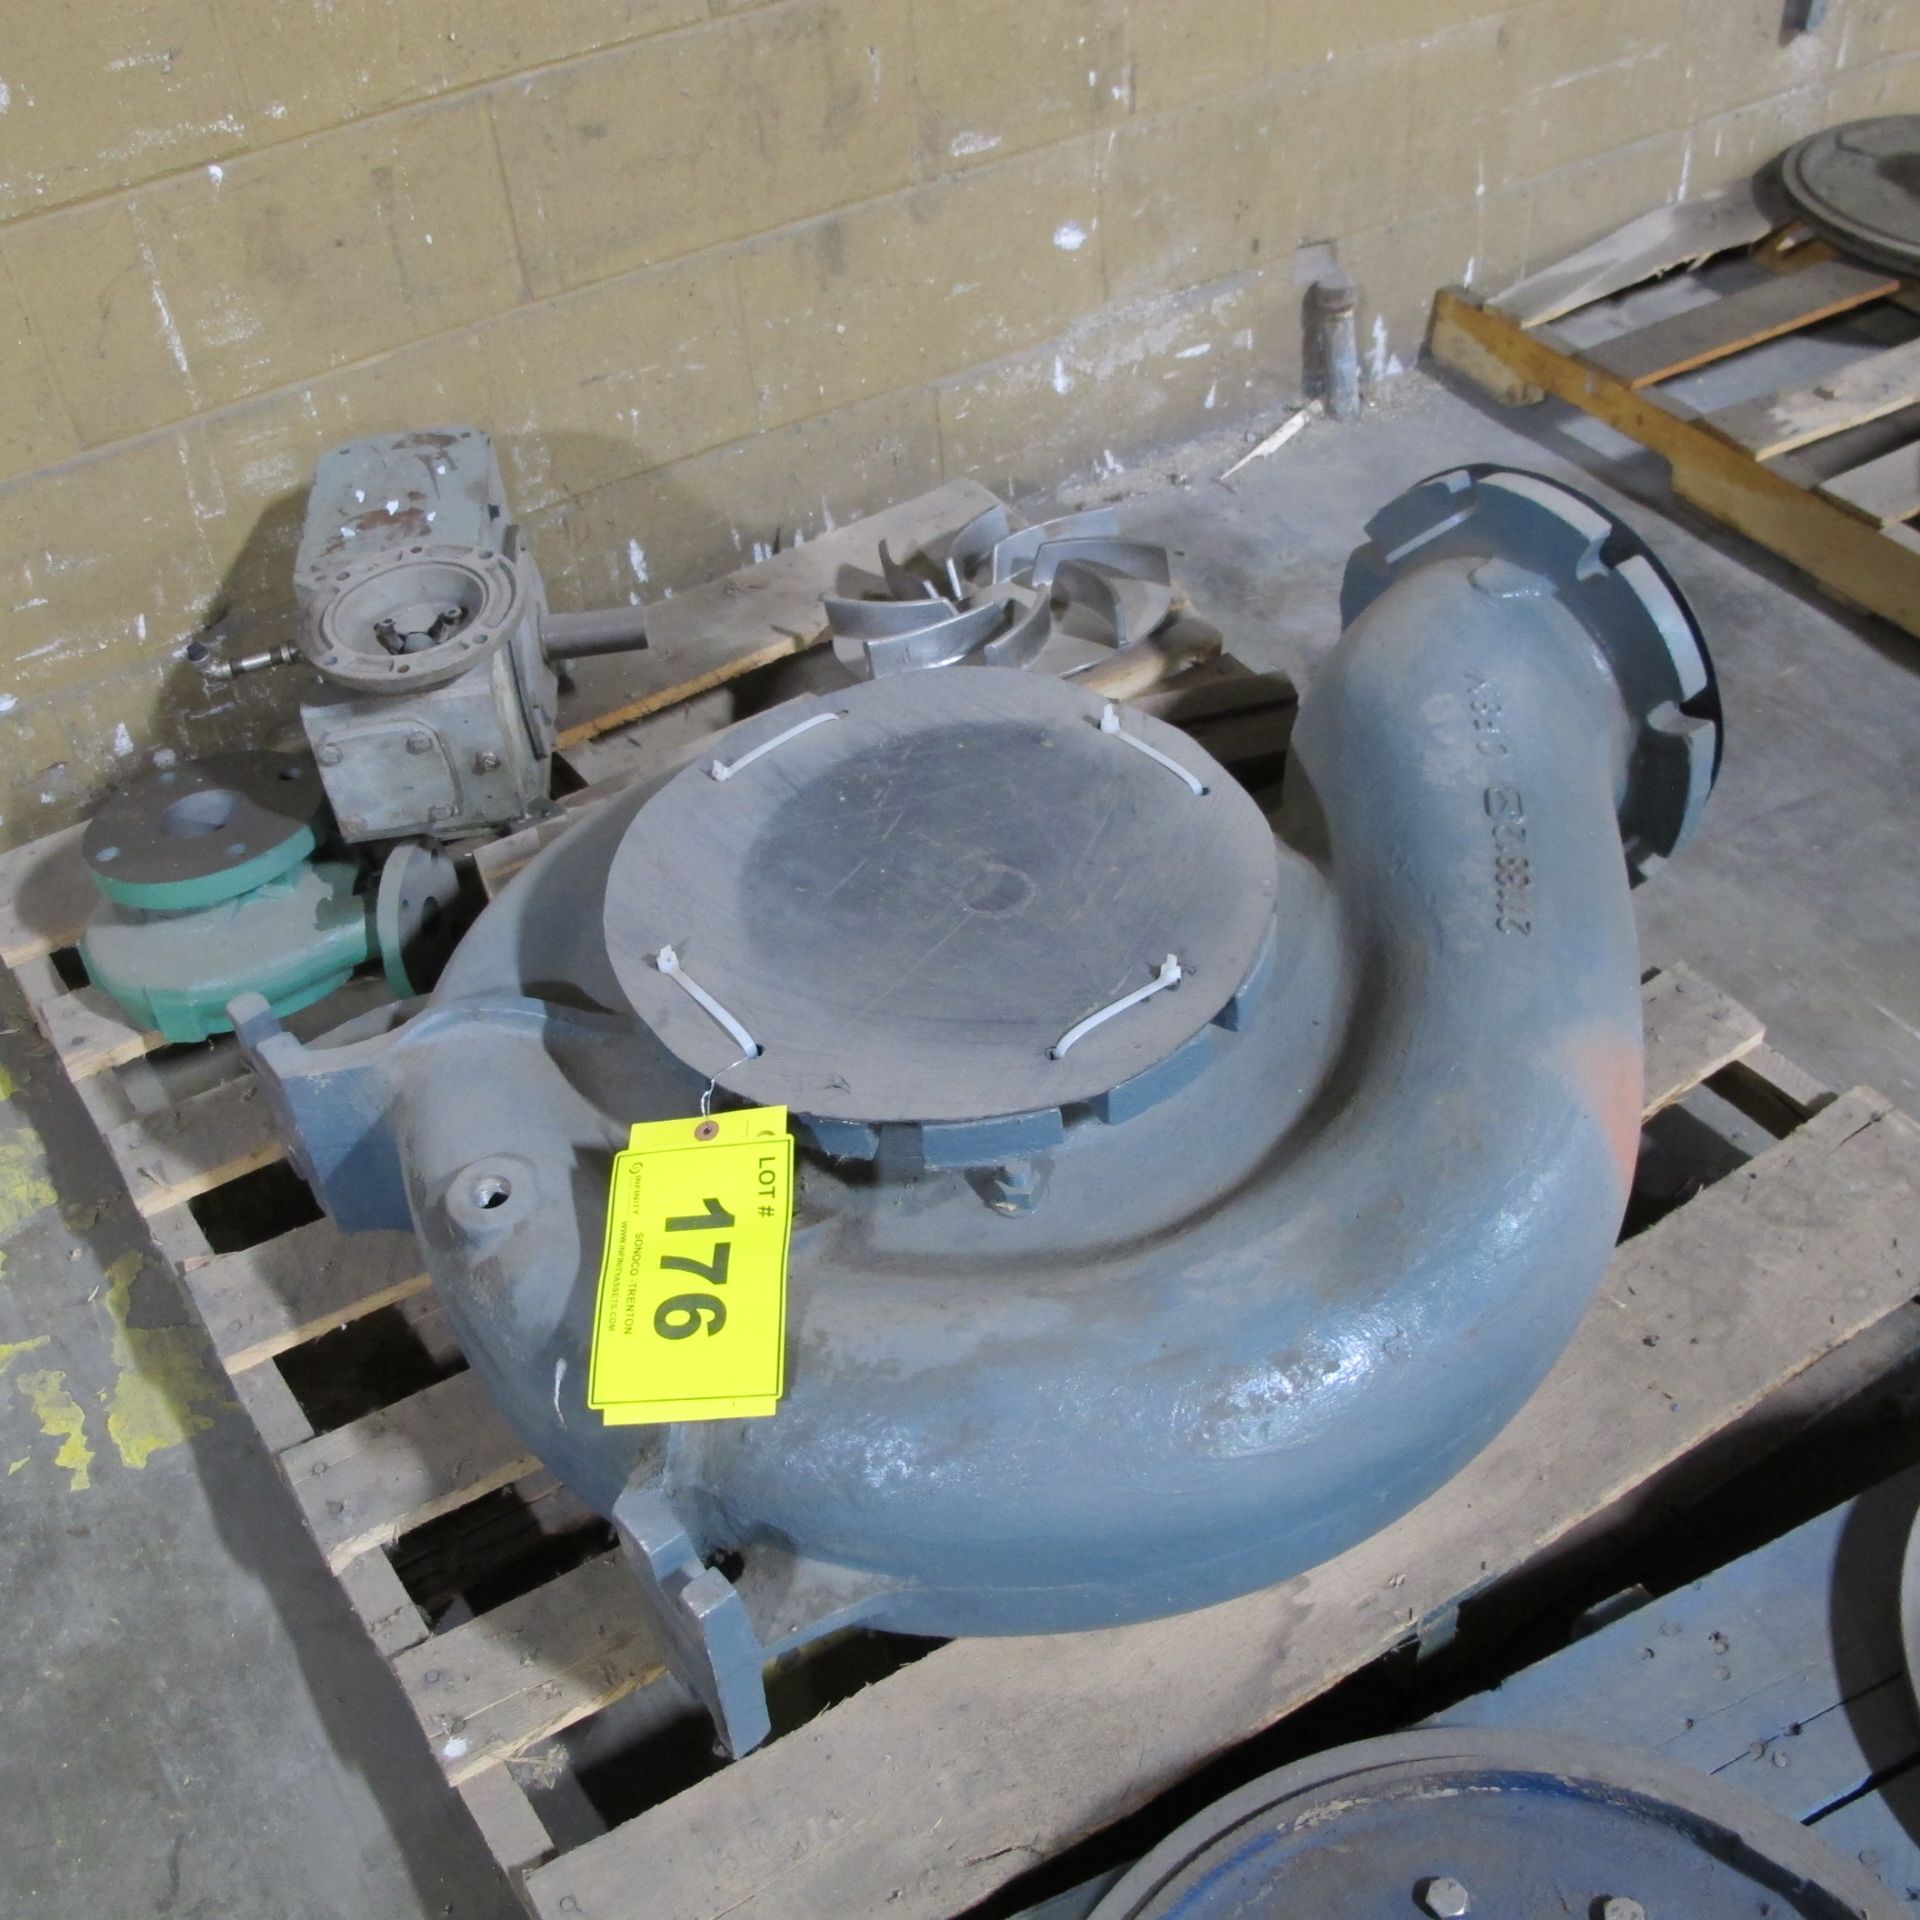 PALLET OF ASST. PUMP COMPONENTS AND GEARBOX (EAST BUILDING, SOUTH WAREHOUSE)